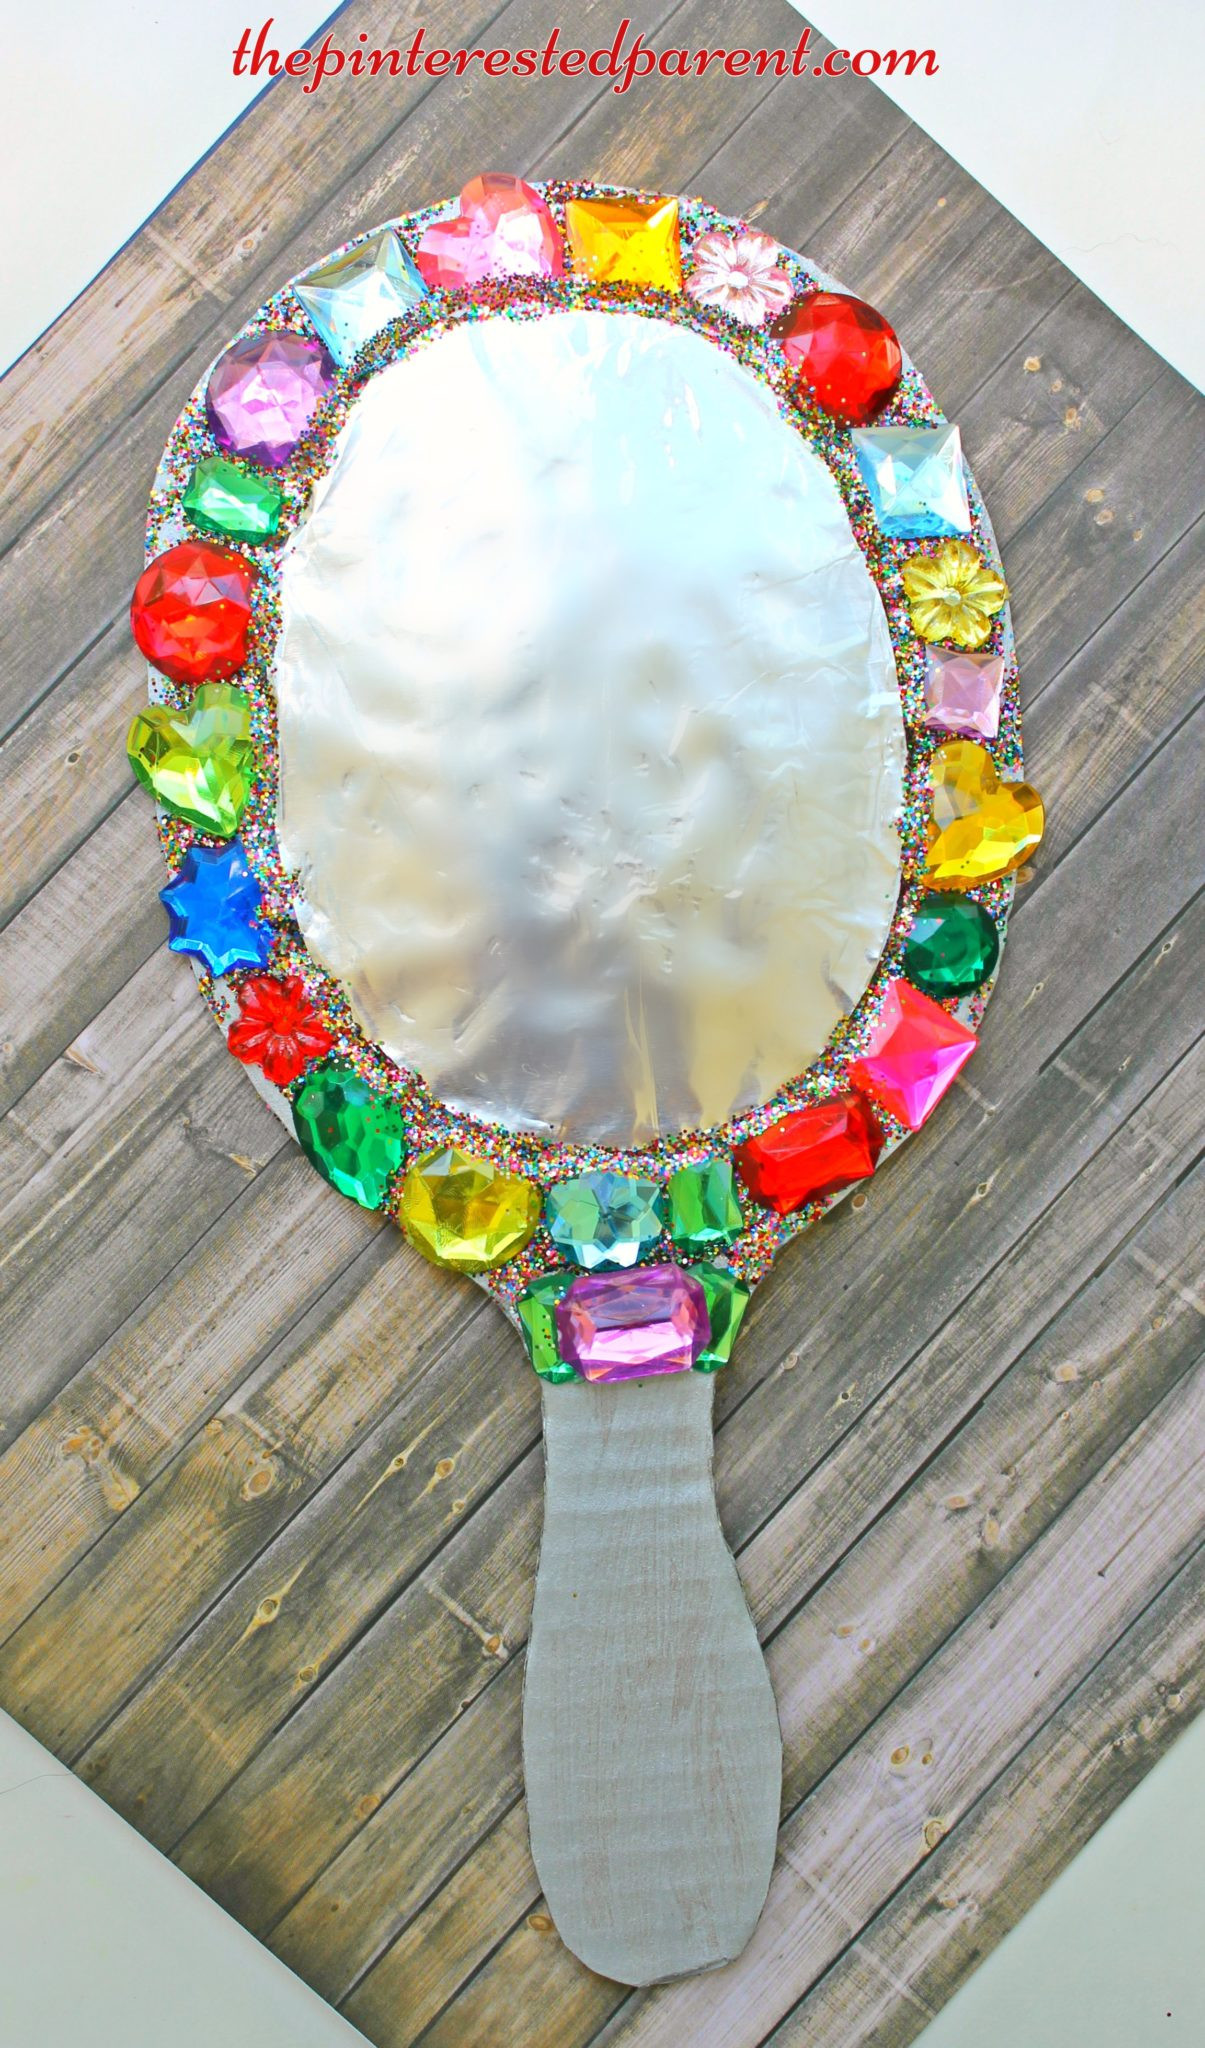 Arts And Crafts For Little Kids
 Jeweled Cardboard Mirror Craft – The Pinterested Parent